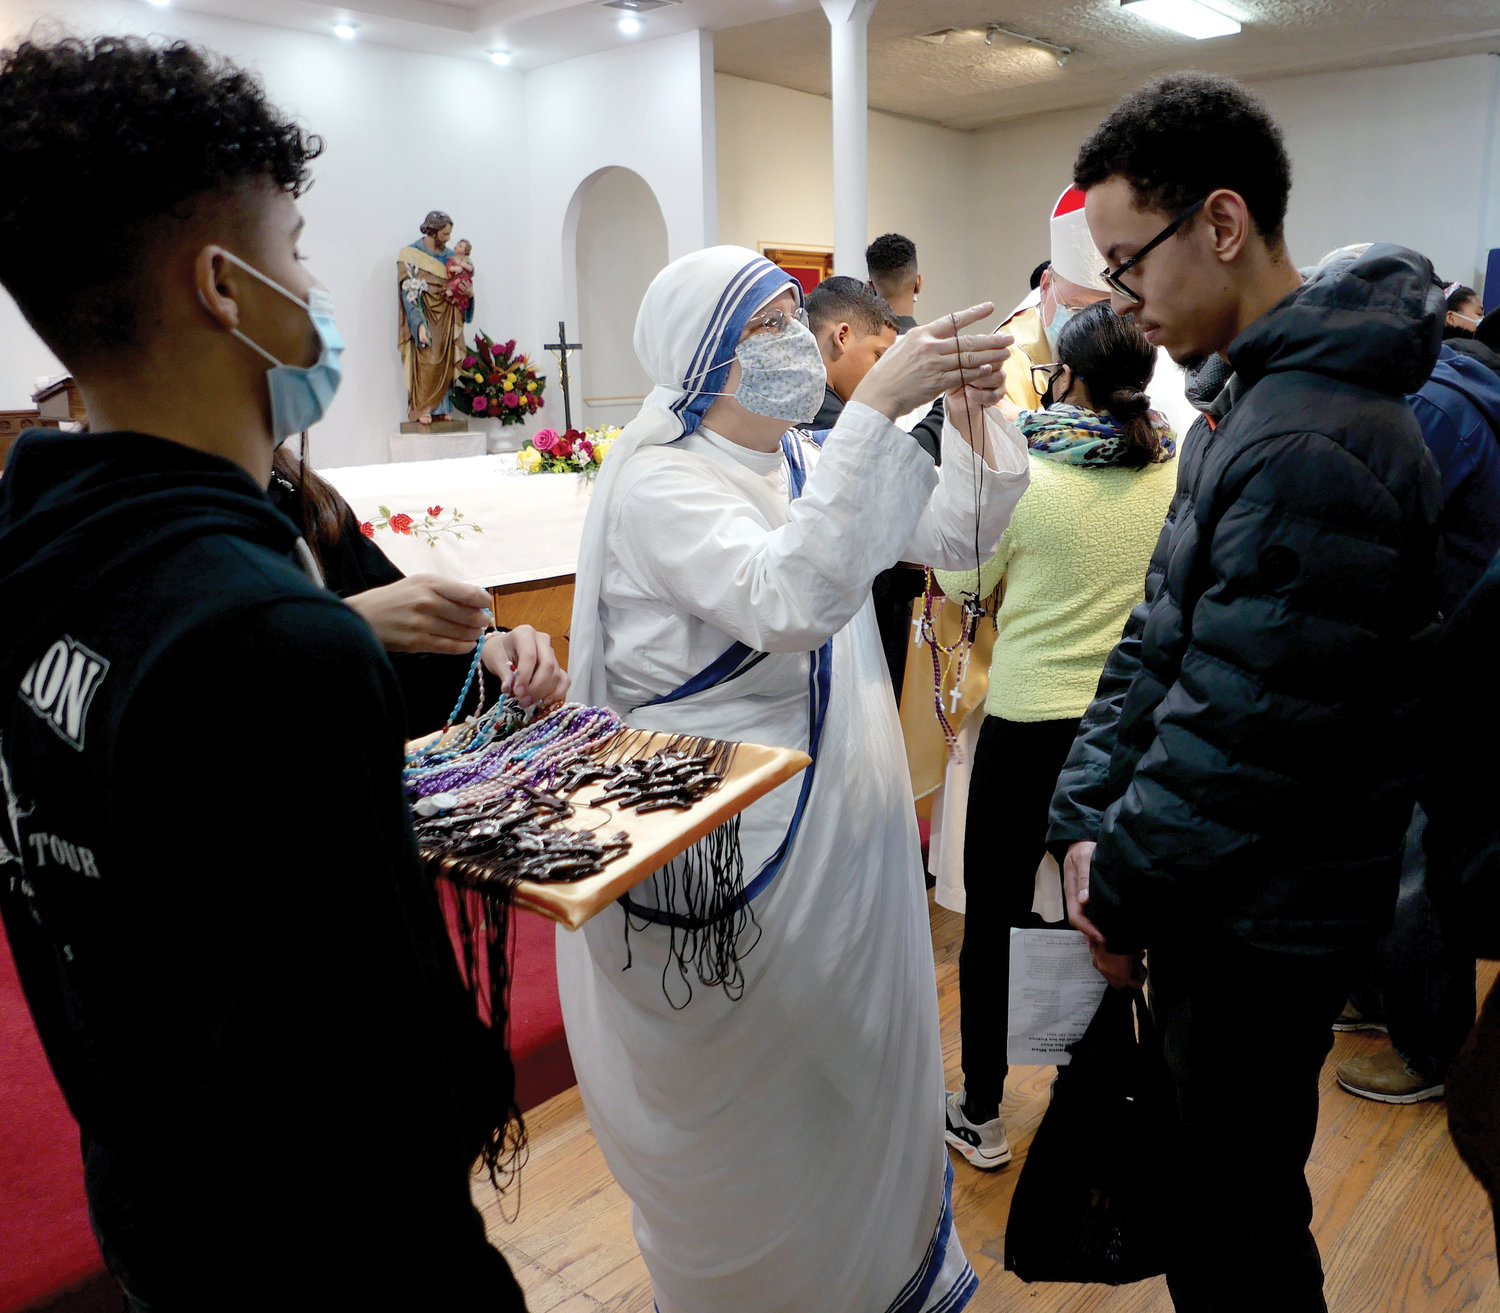 A weekend of prayer and solidarity with the poor was celebrated Nov. 13-14 at St. Rita of Cascia Church in the South Bronx. Parish evangelizers receive crosses and rosaries at a commissioning ceremony.